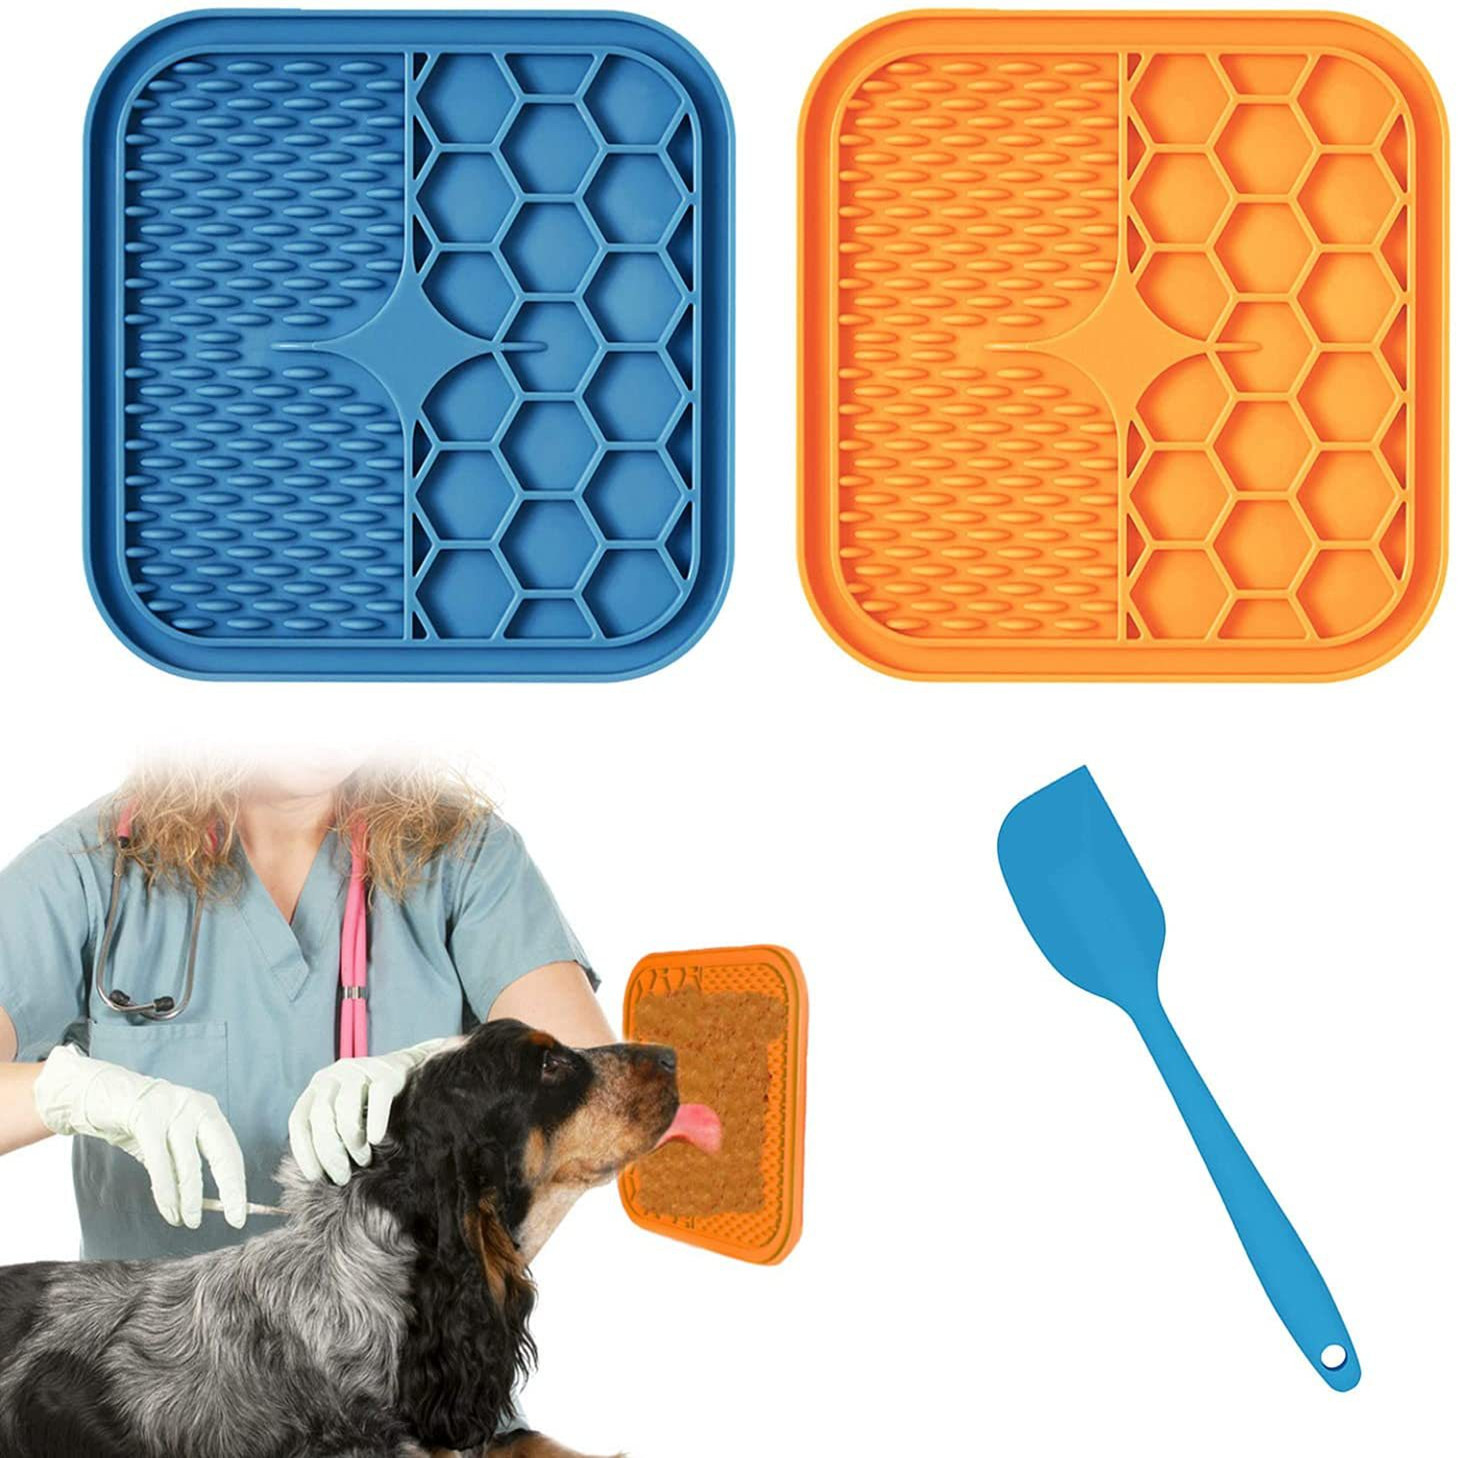 4 Best Lick Mats To Distract Your Dog (11 Tested & Reviewed